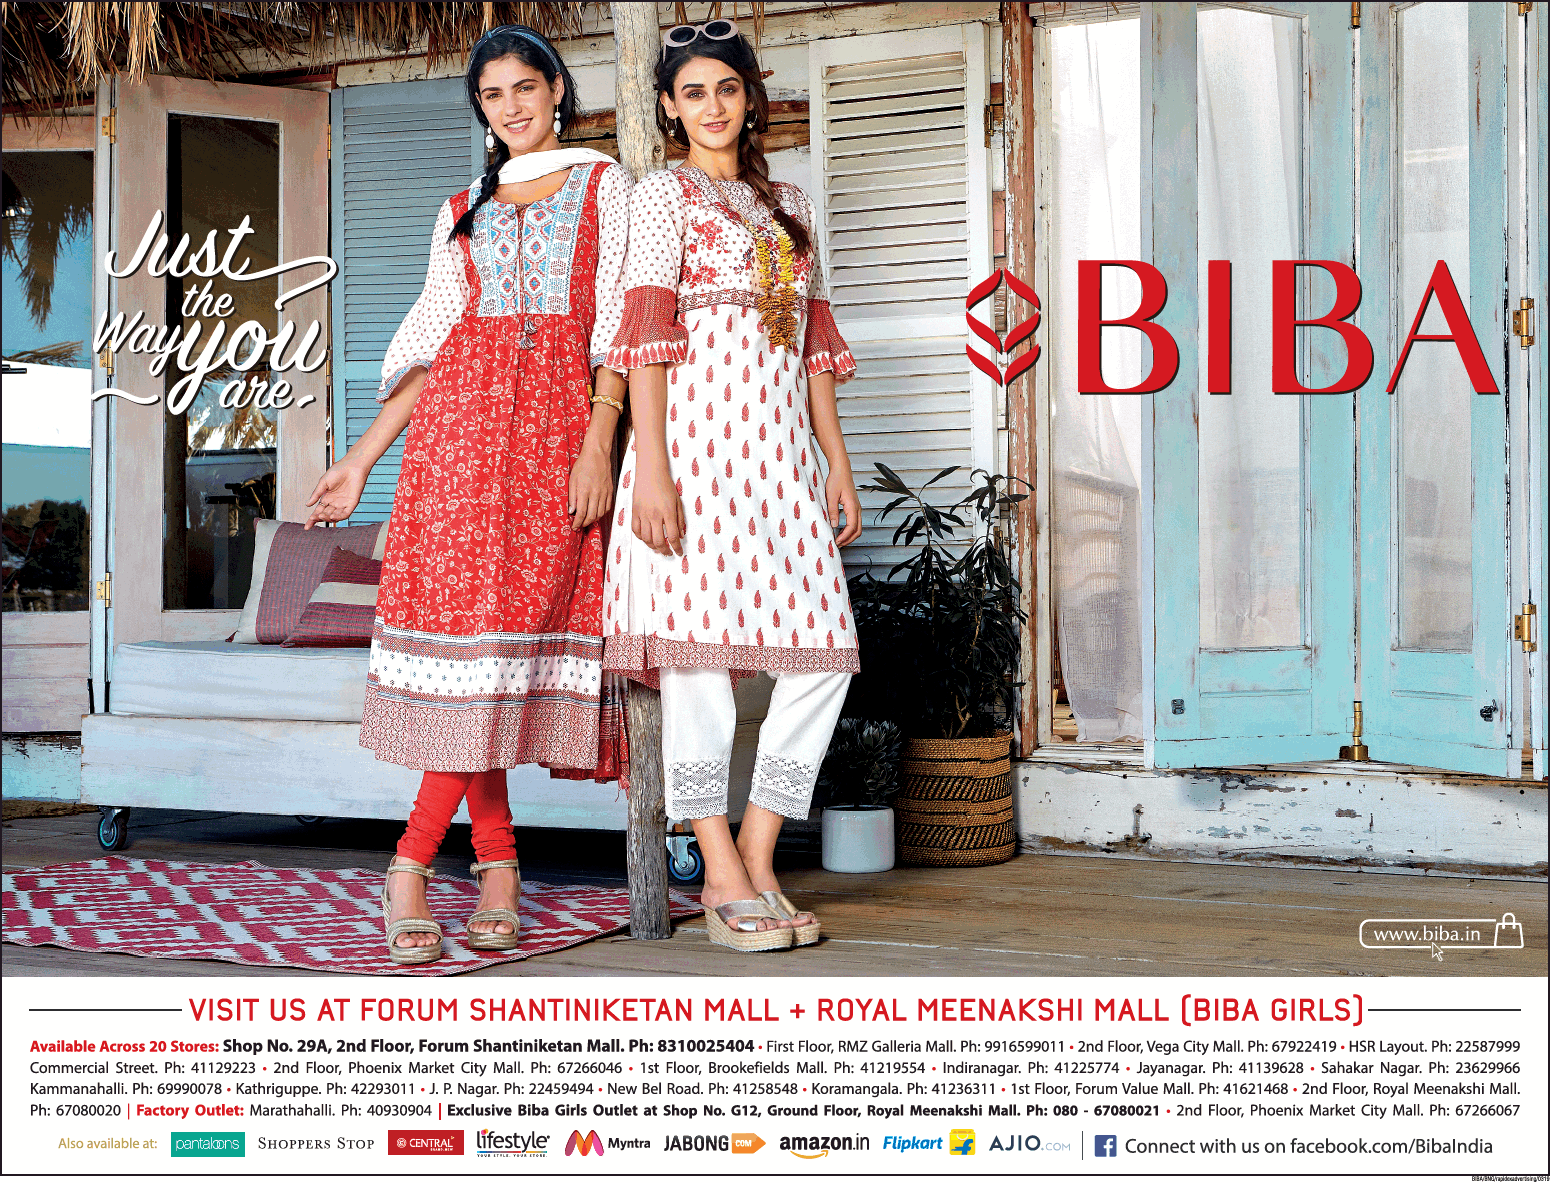 biba-clothing-just-the-way-you-are-ad-times-of-india-bangalore-22-03-2019.png